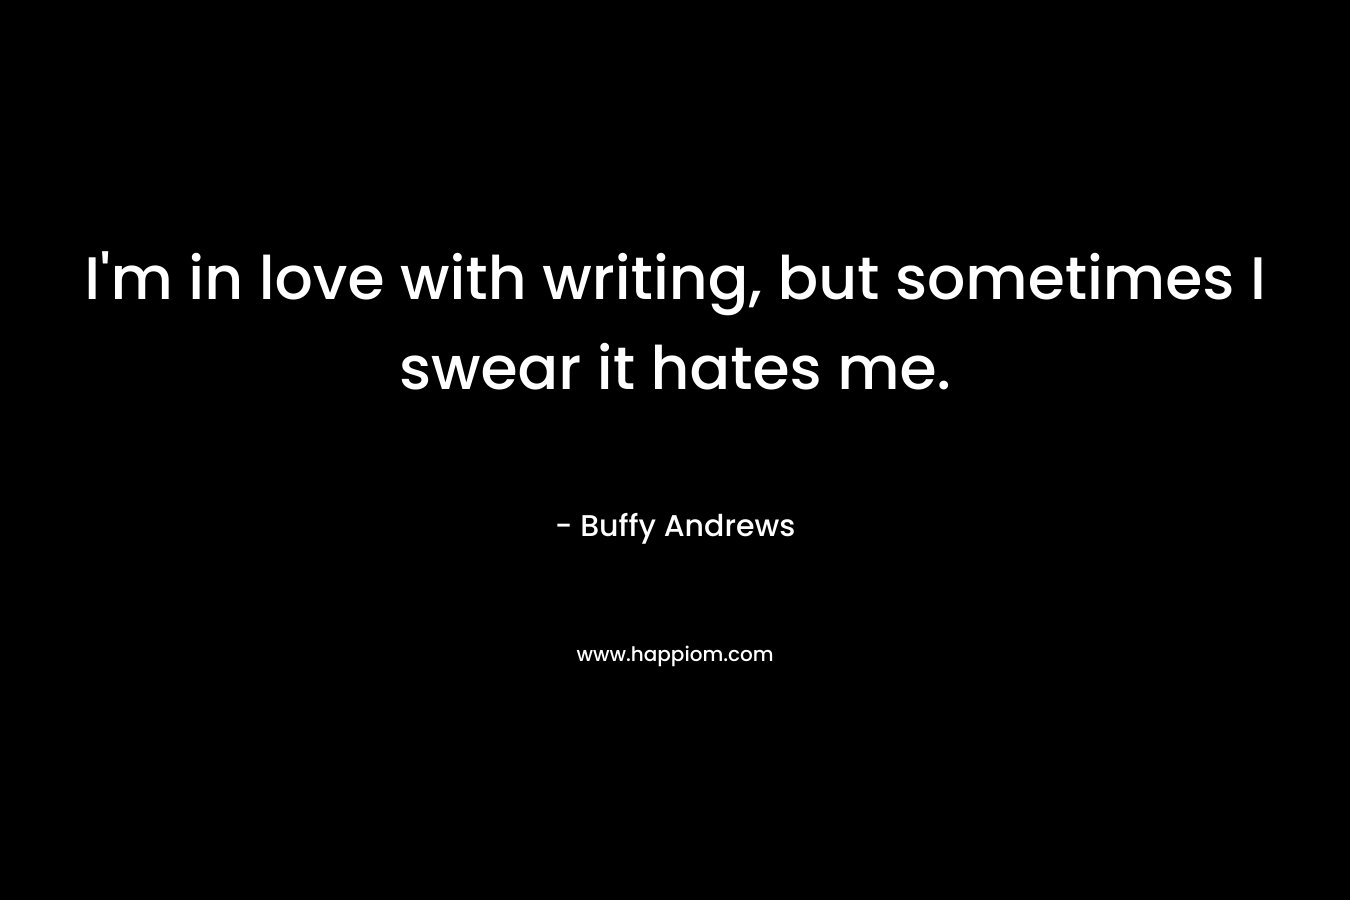 I’m in love with writing, but sometimes I swear it hates me. – Buffy Andrews